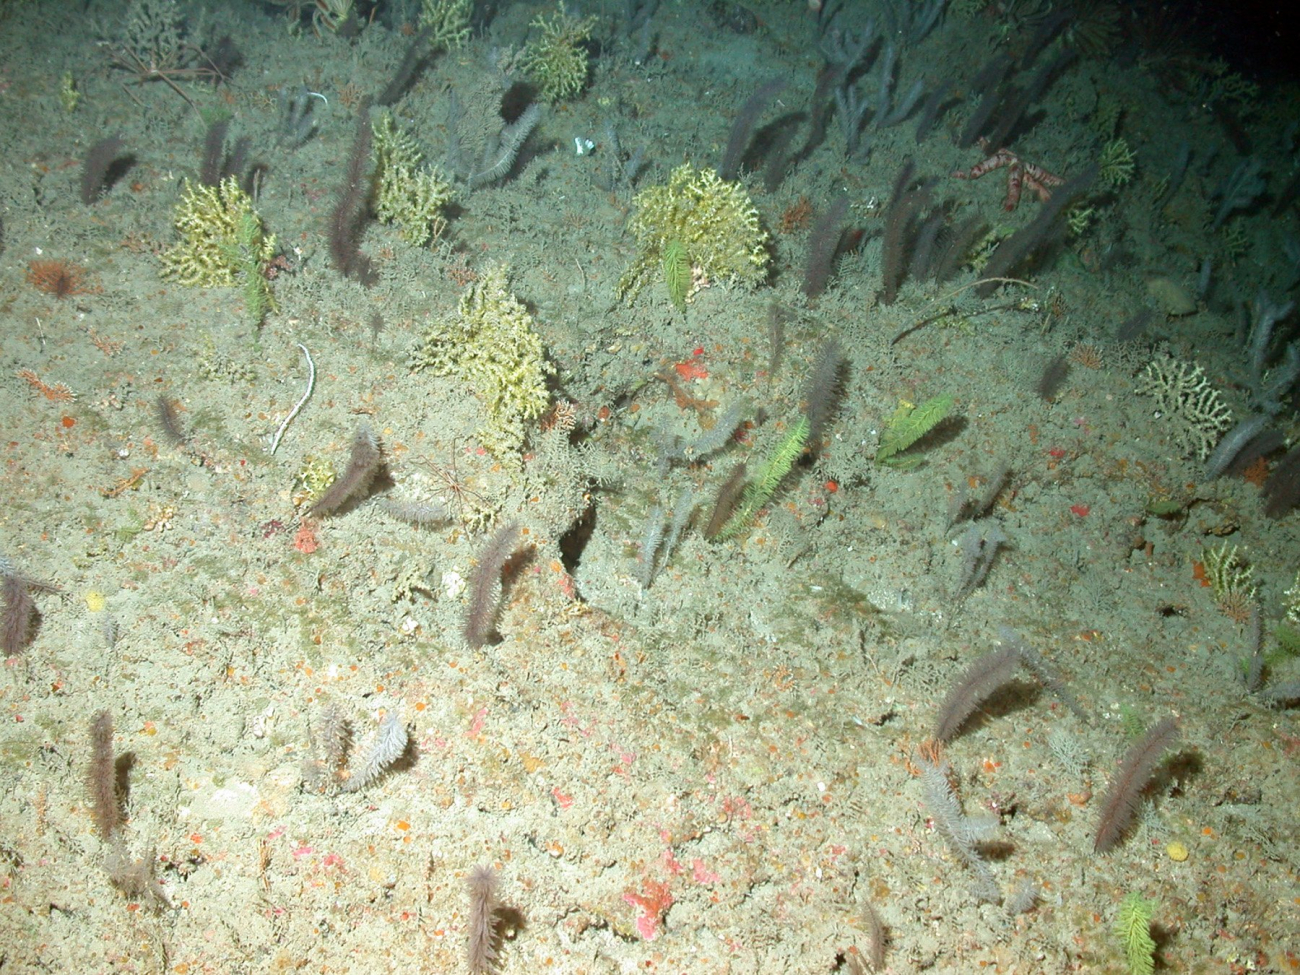 Green, gray, and white bottle brush corals with a few other deepwater coralsmixed in